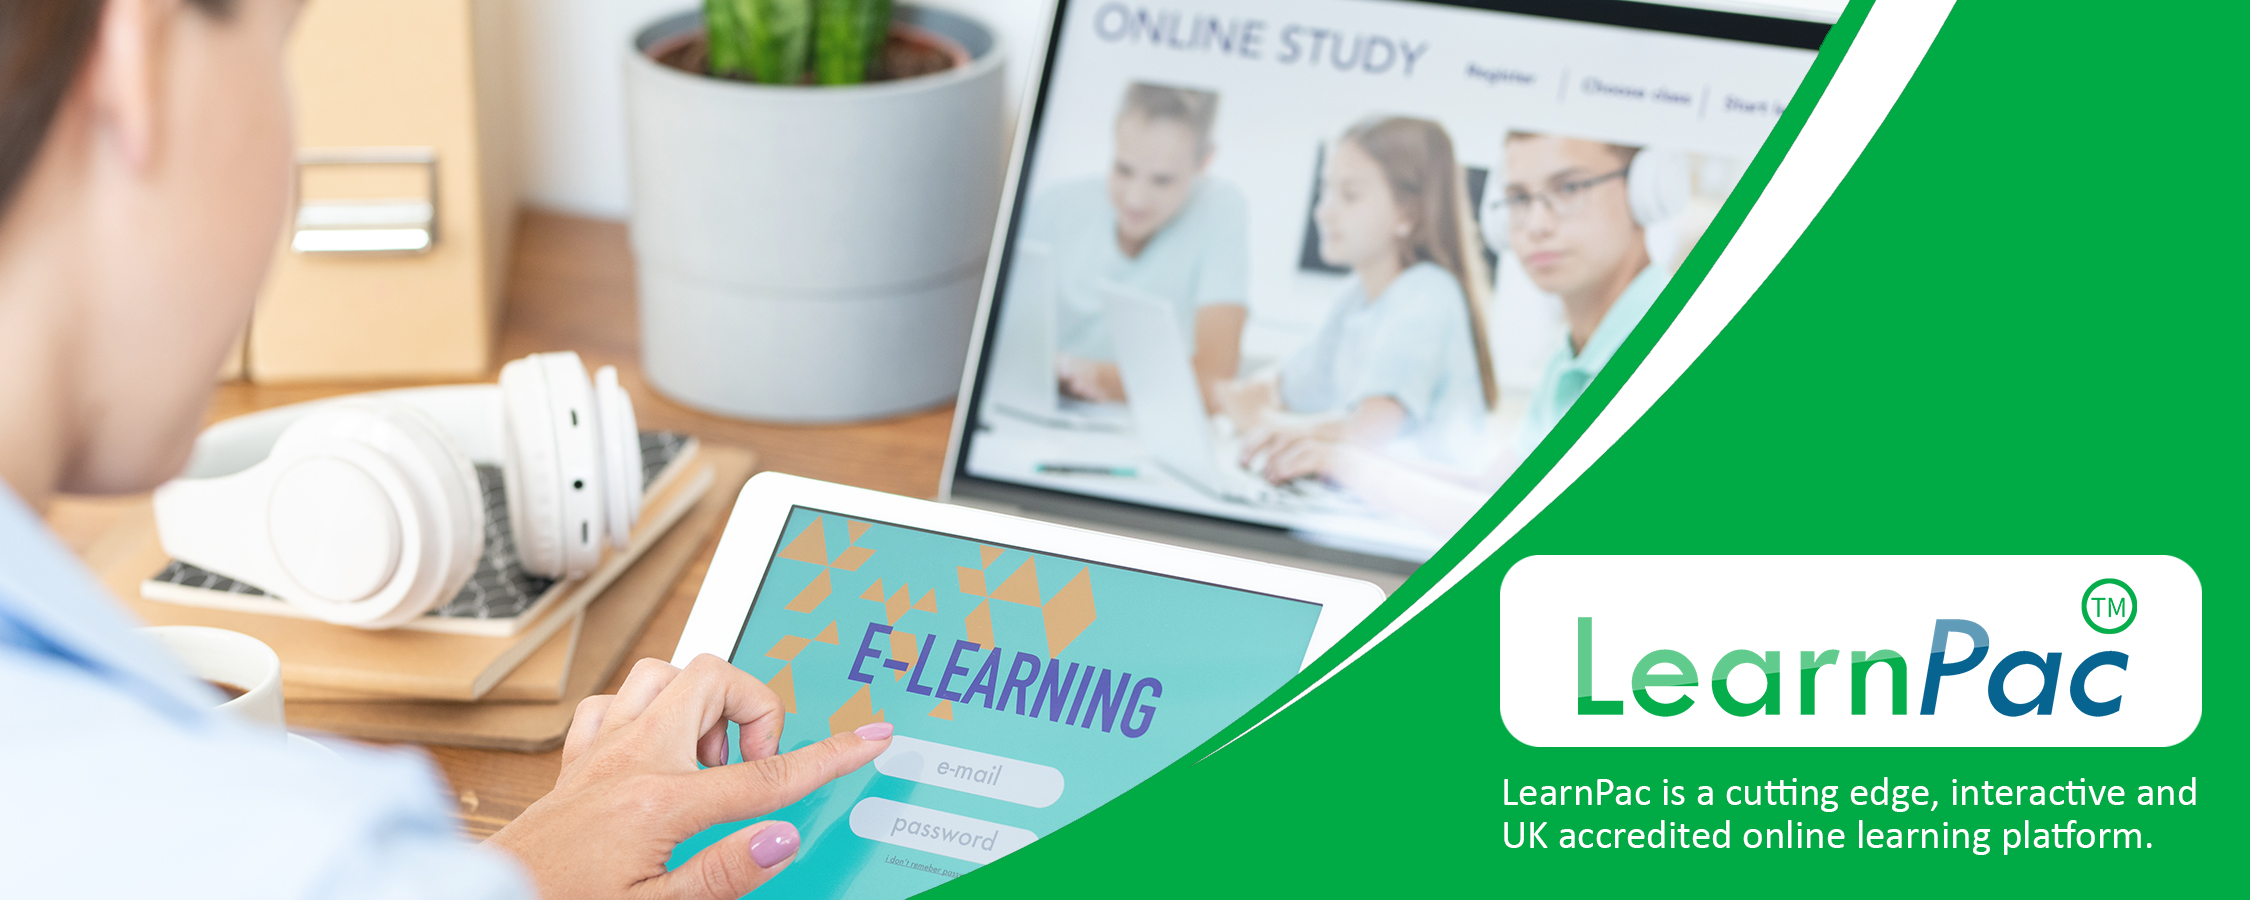 Report Writing - eLearning Course - CPD Certified - LearnPac Systems UK -